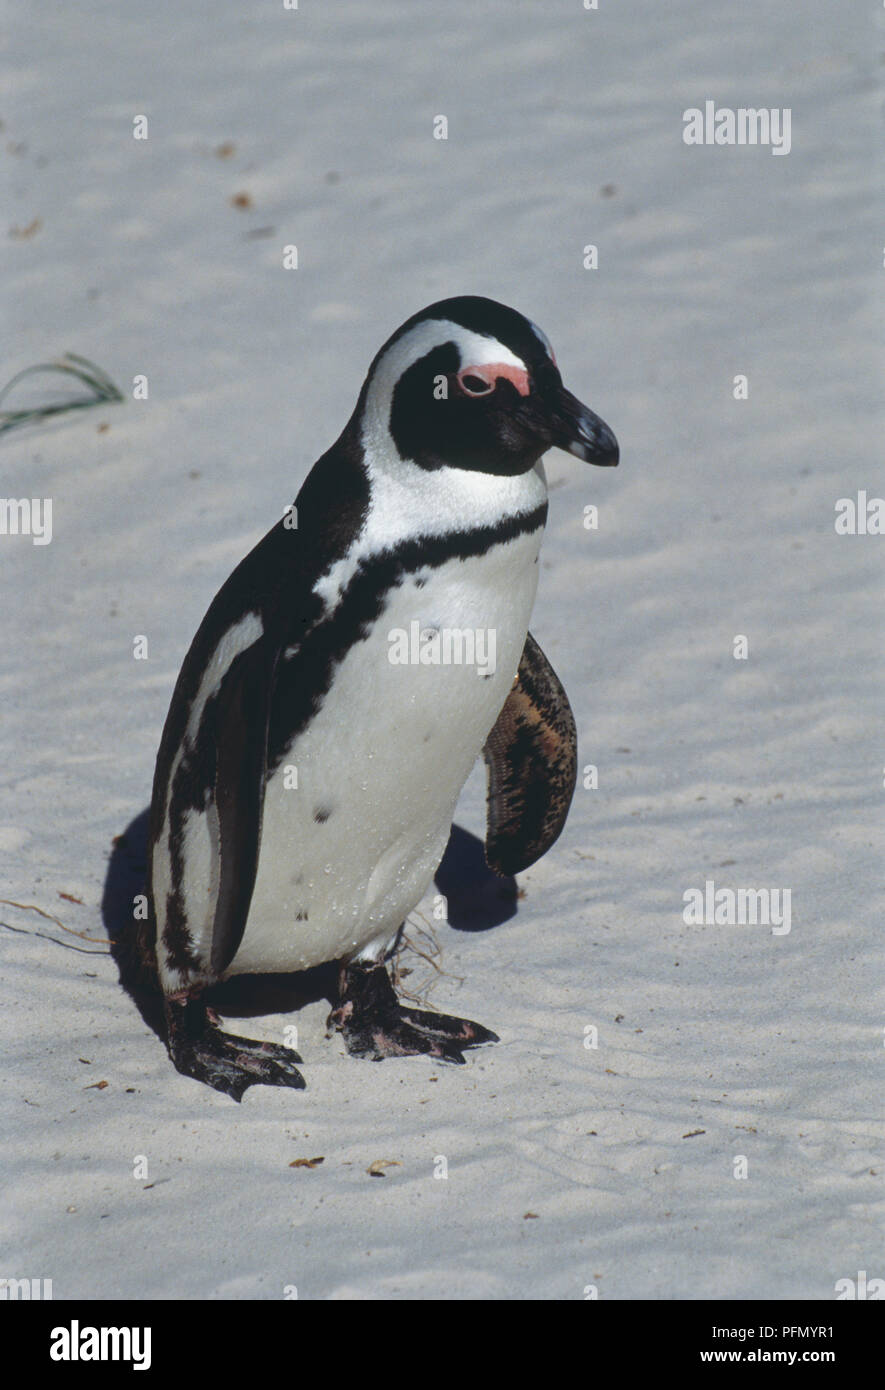 South Africa, Boulders Beach, African Penguin (Spheniscus demersus) standing in sand, high angle view. Stock Photo